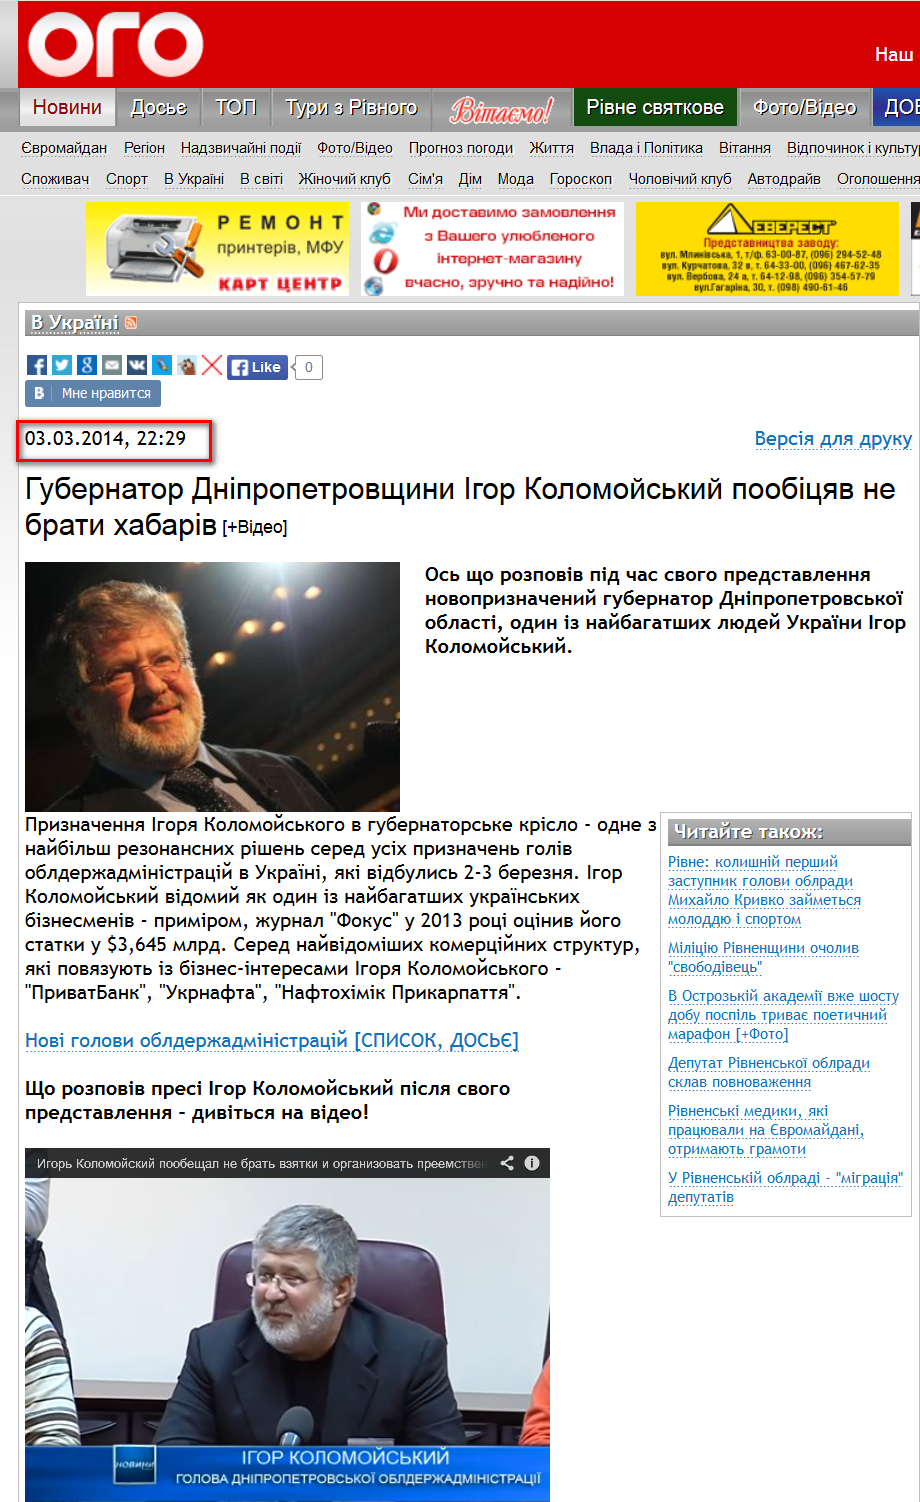 http://www.ogo.ua/articles/view/2014-03-03/48494.html